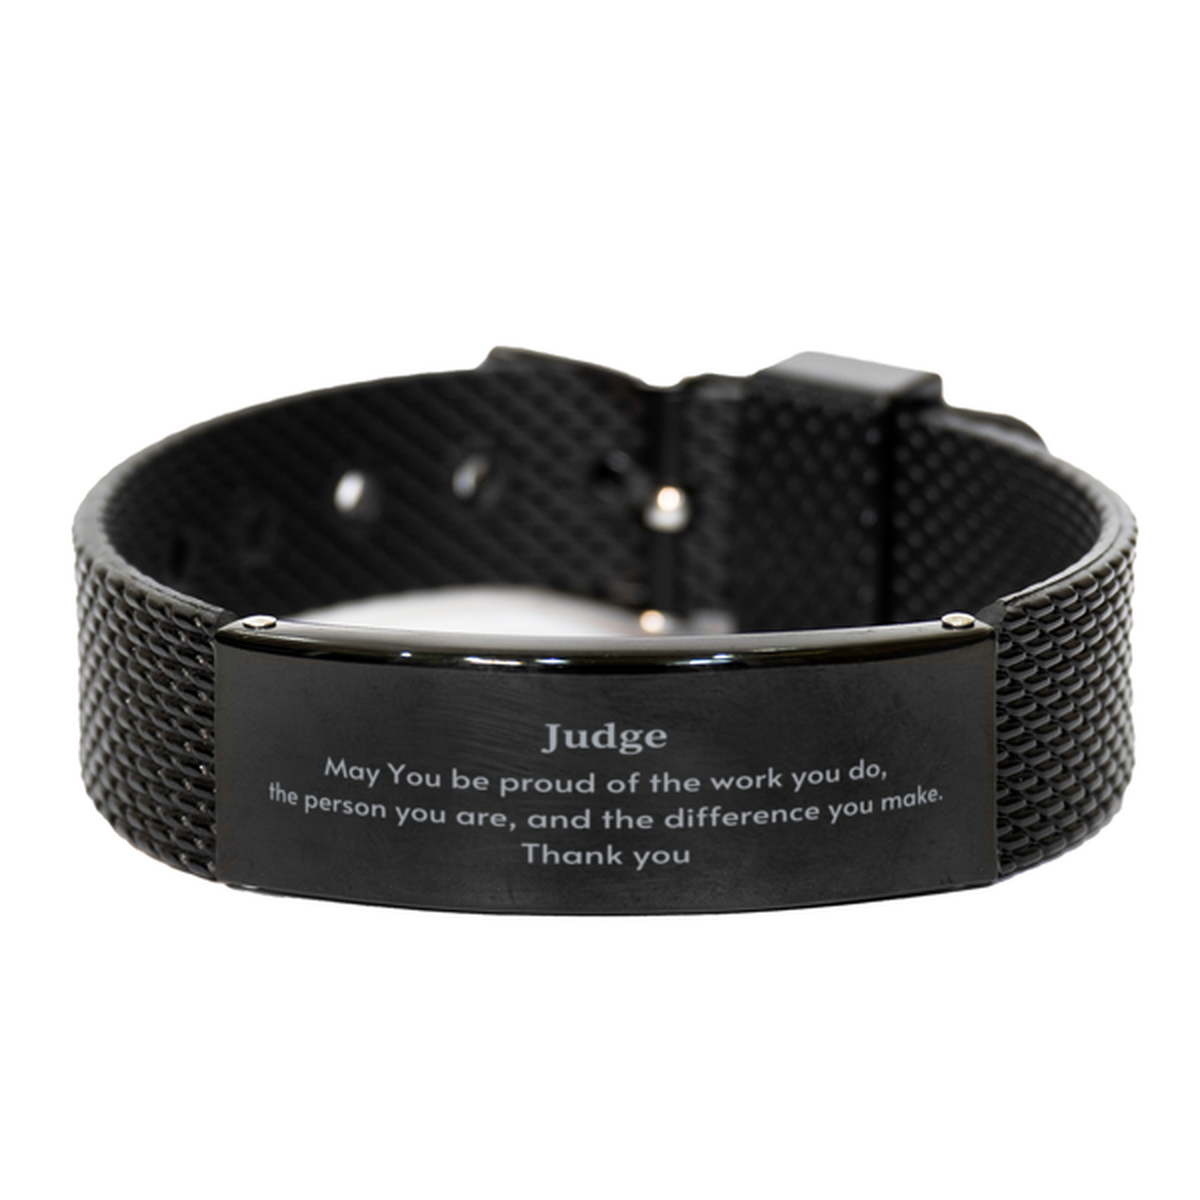 Heartwarming Black Shark Mesh Bracelet Retirement Coworkers Gifts for Judge, Judge May You be proud of the work you do, the person you are Gifts for Boss Men Women Friends